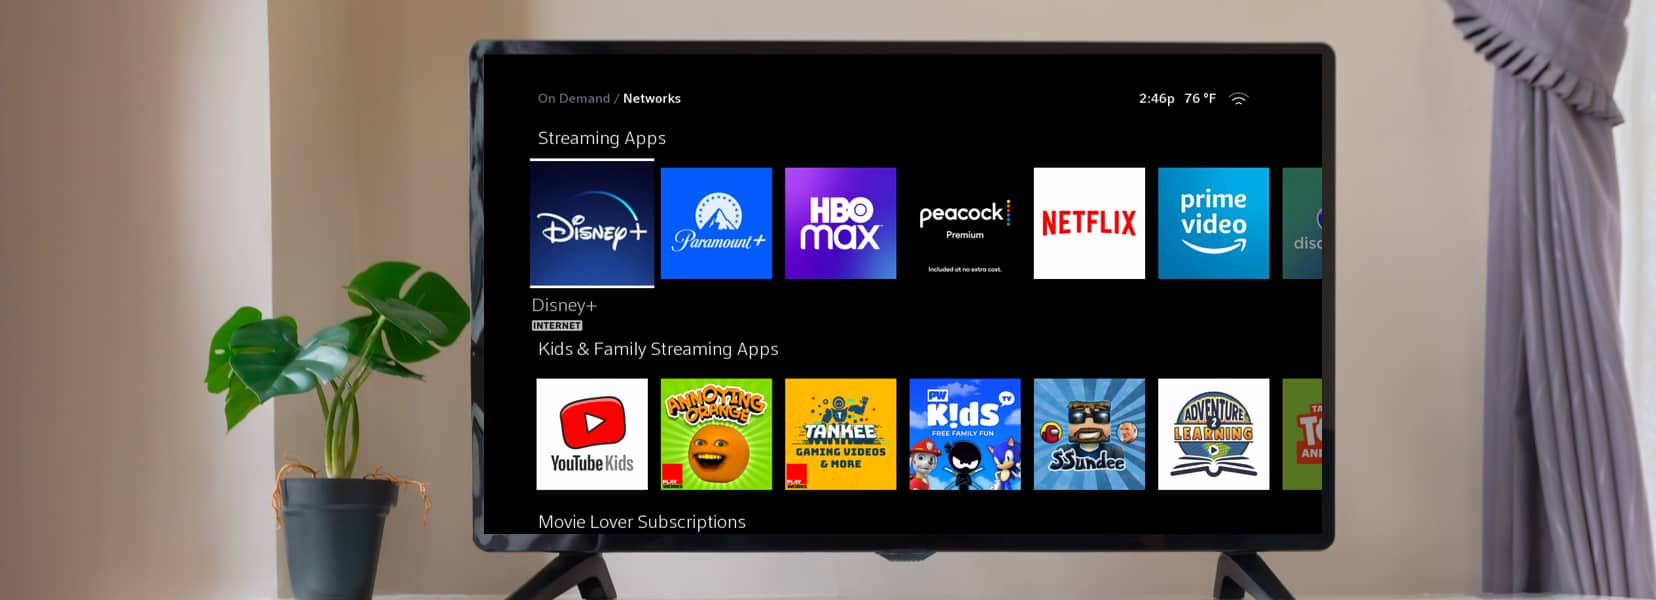 smart device streaming apps